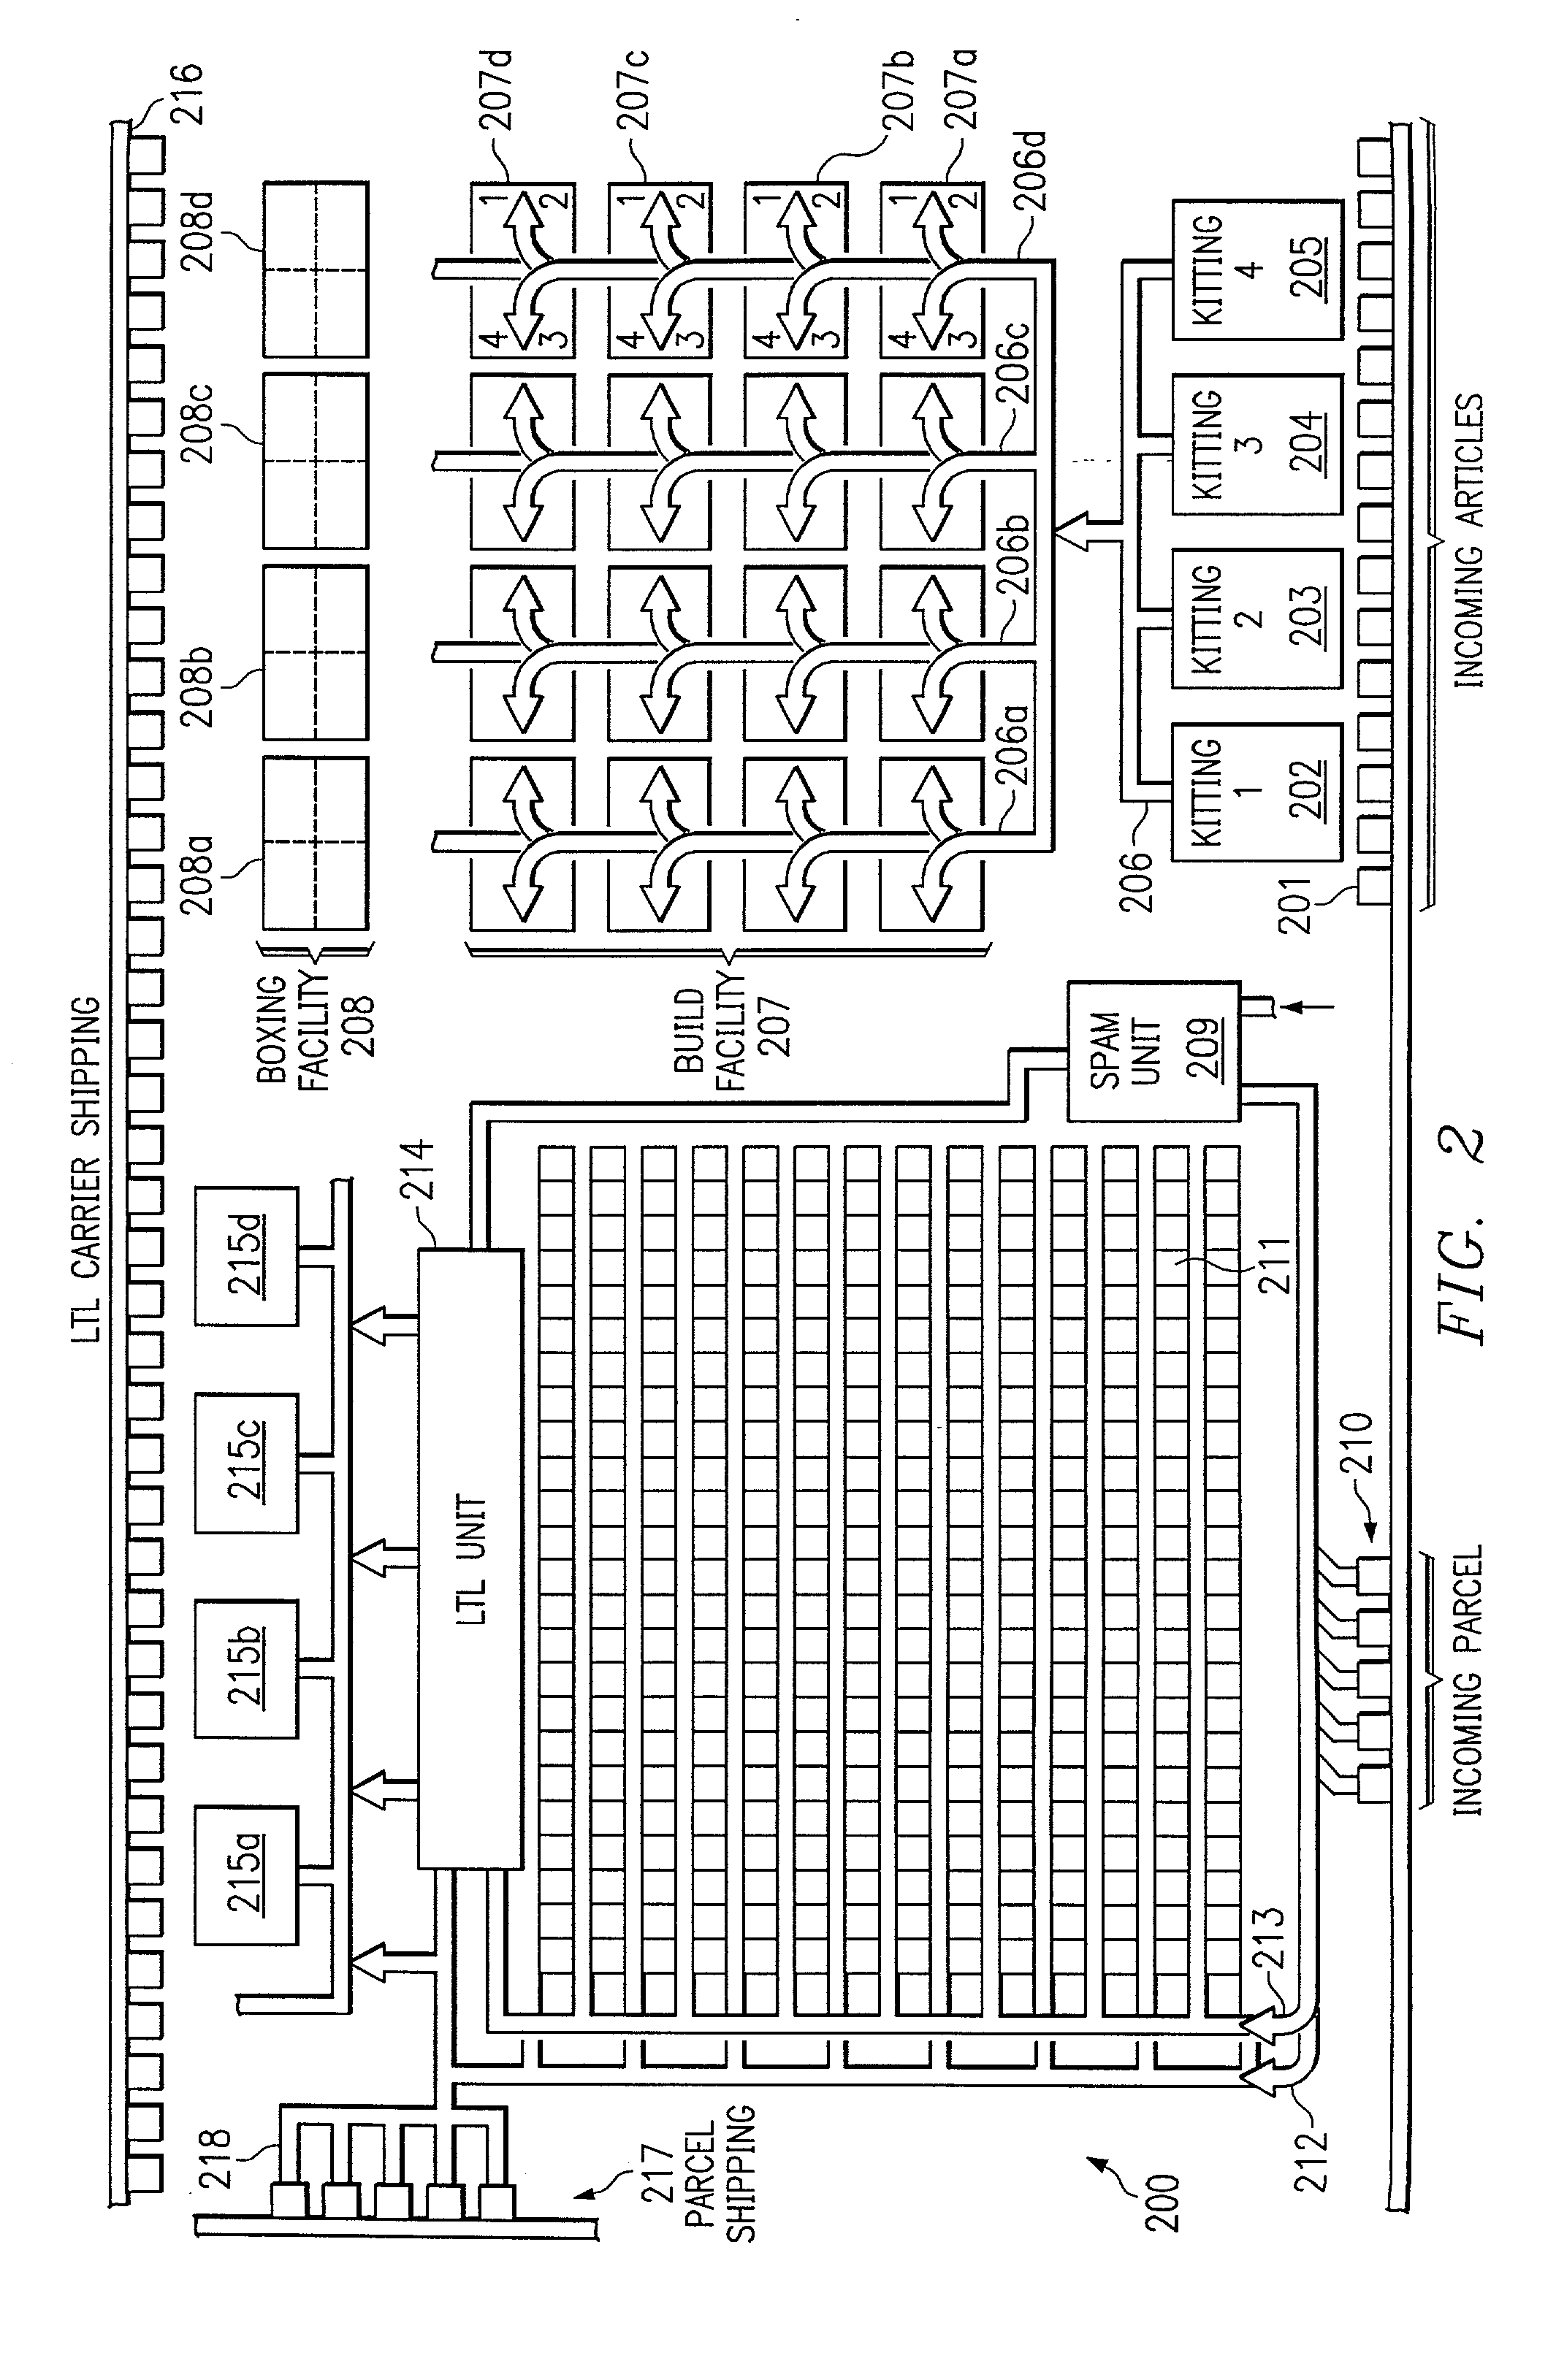 Method and system for simulating production within a manufacturing environment